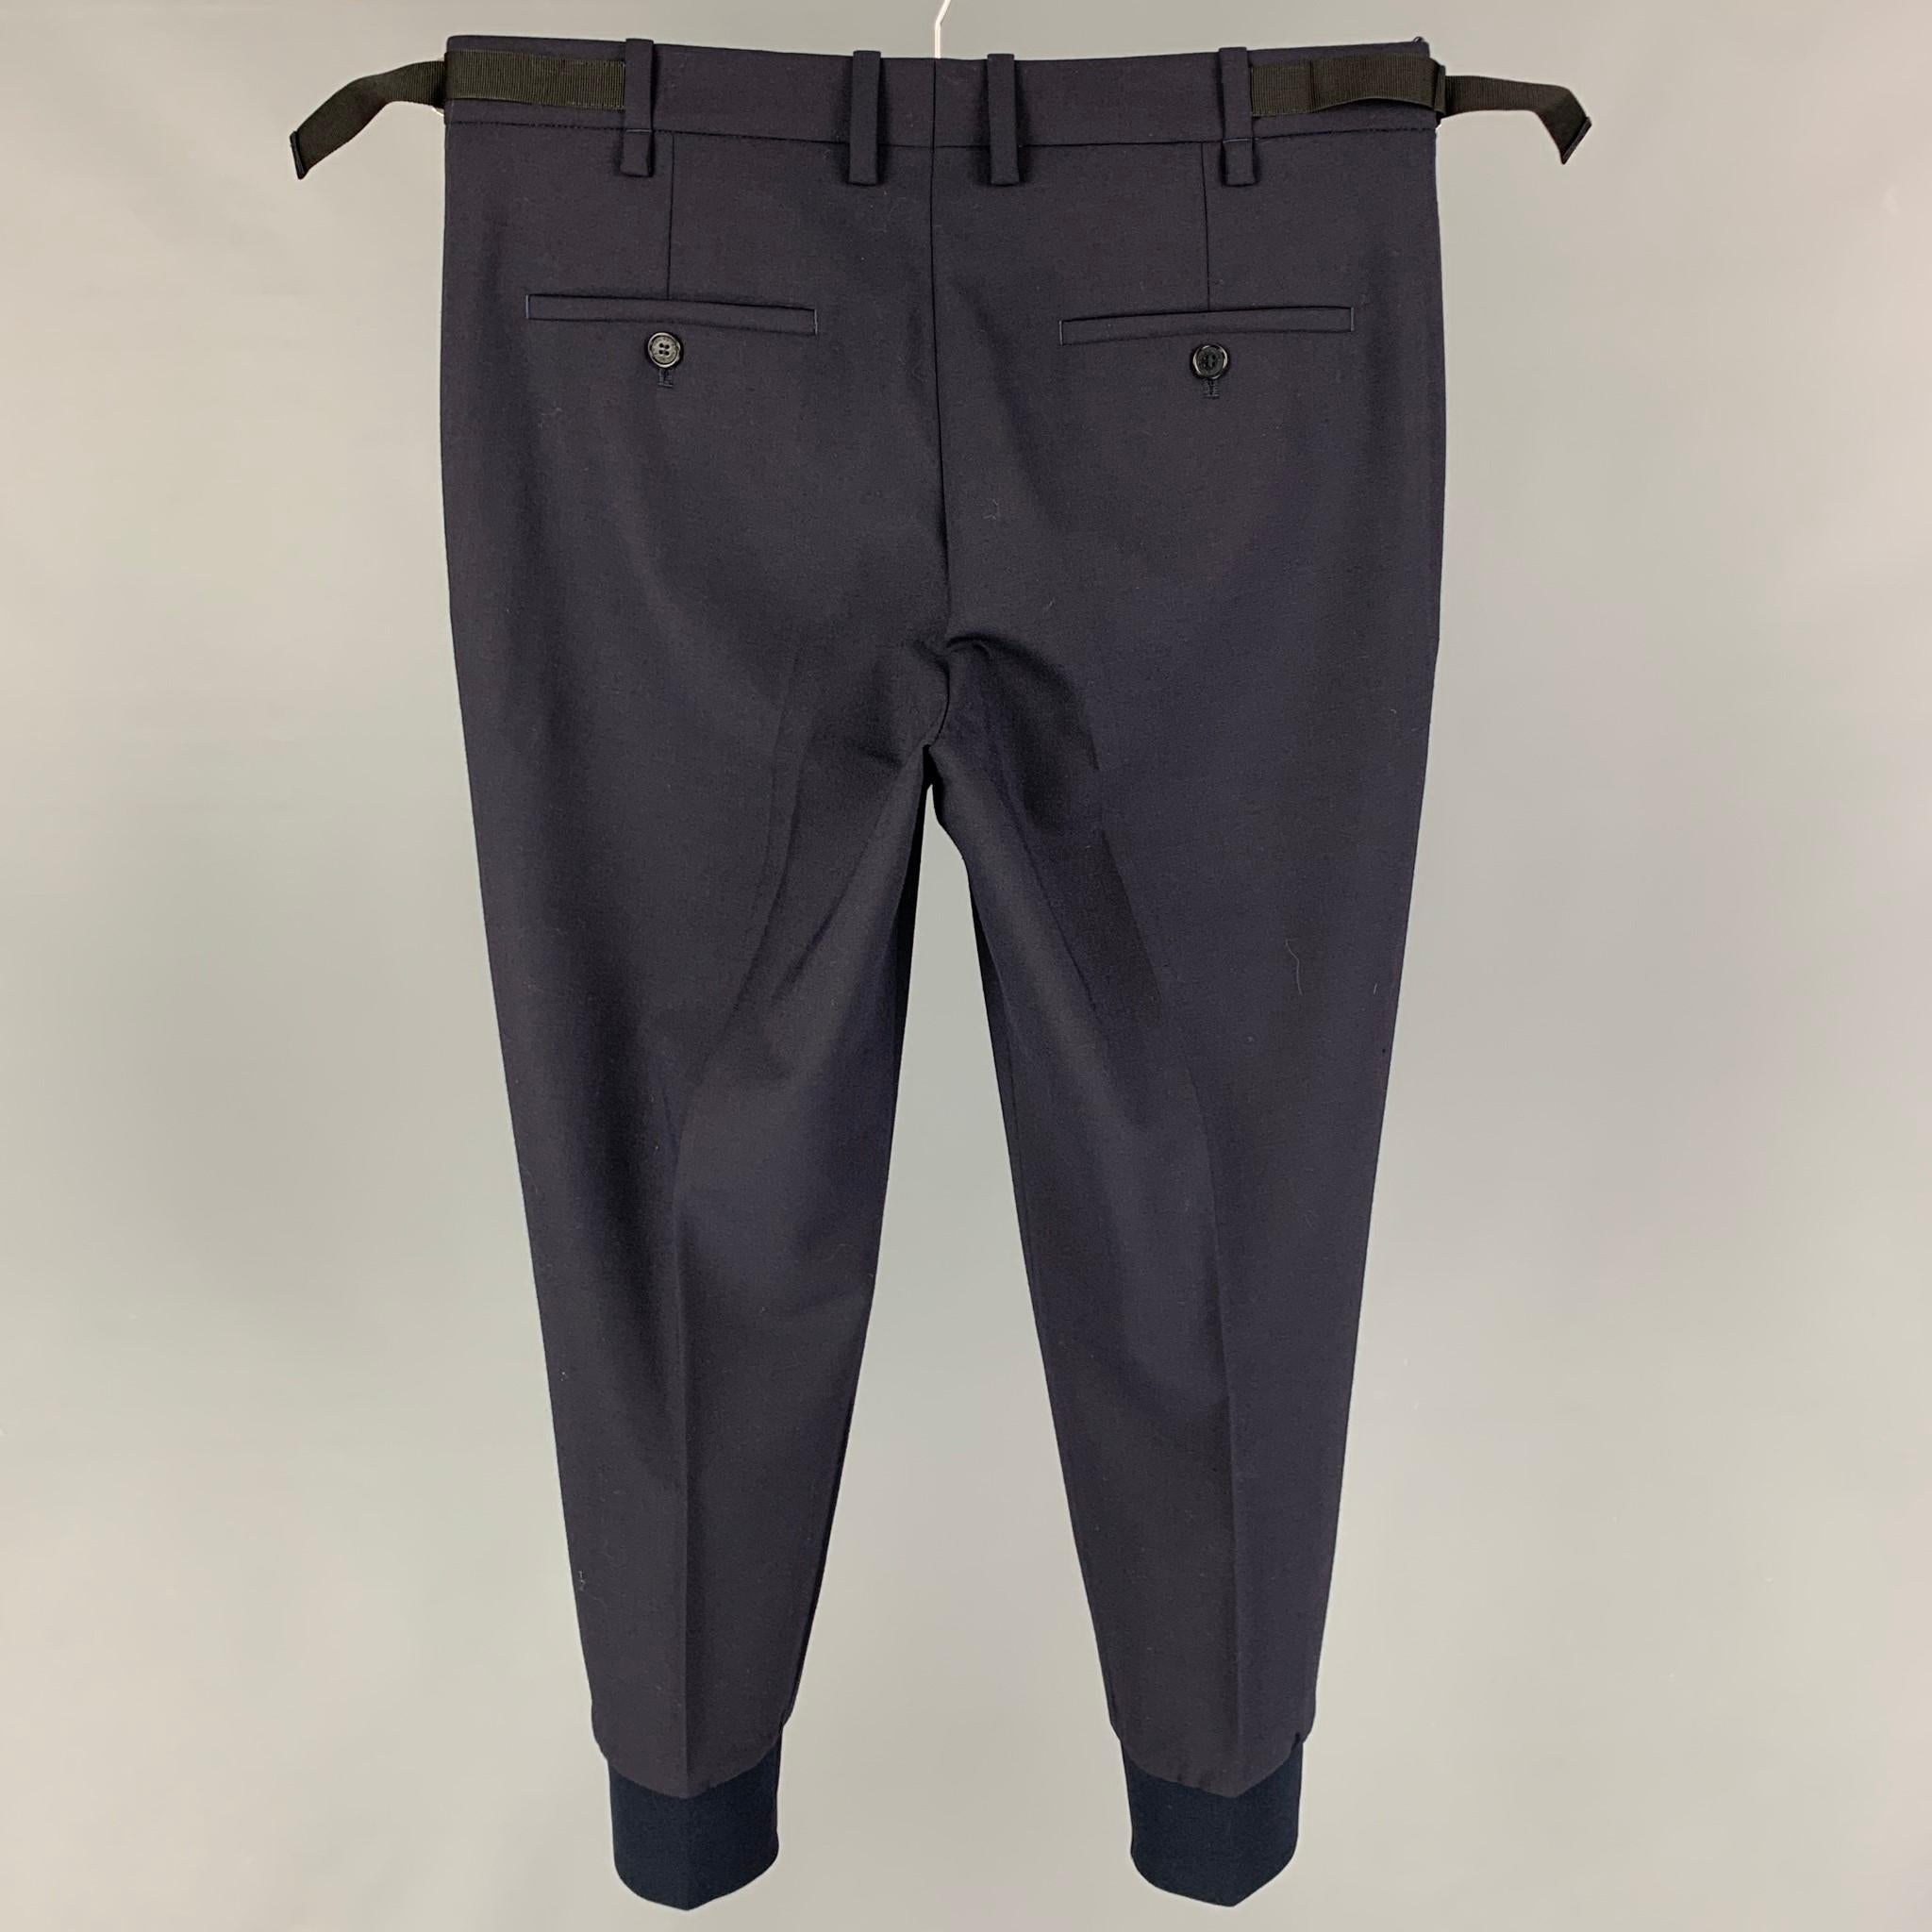 NEIL BARRETT dress pants comes in a navy wool blend featuring a skinny fit, flat front, elastic cuffs, side tabs, and a zip fly closure. 

Very Good Pre-Owned Condition.
Marked: 46
Original Retail Price: $590.00

Measurements:

Waist: 32 in.
Rise: